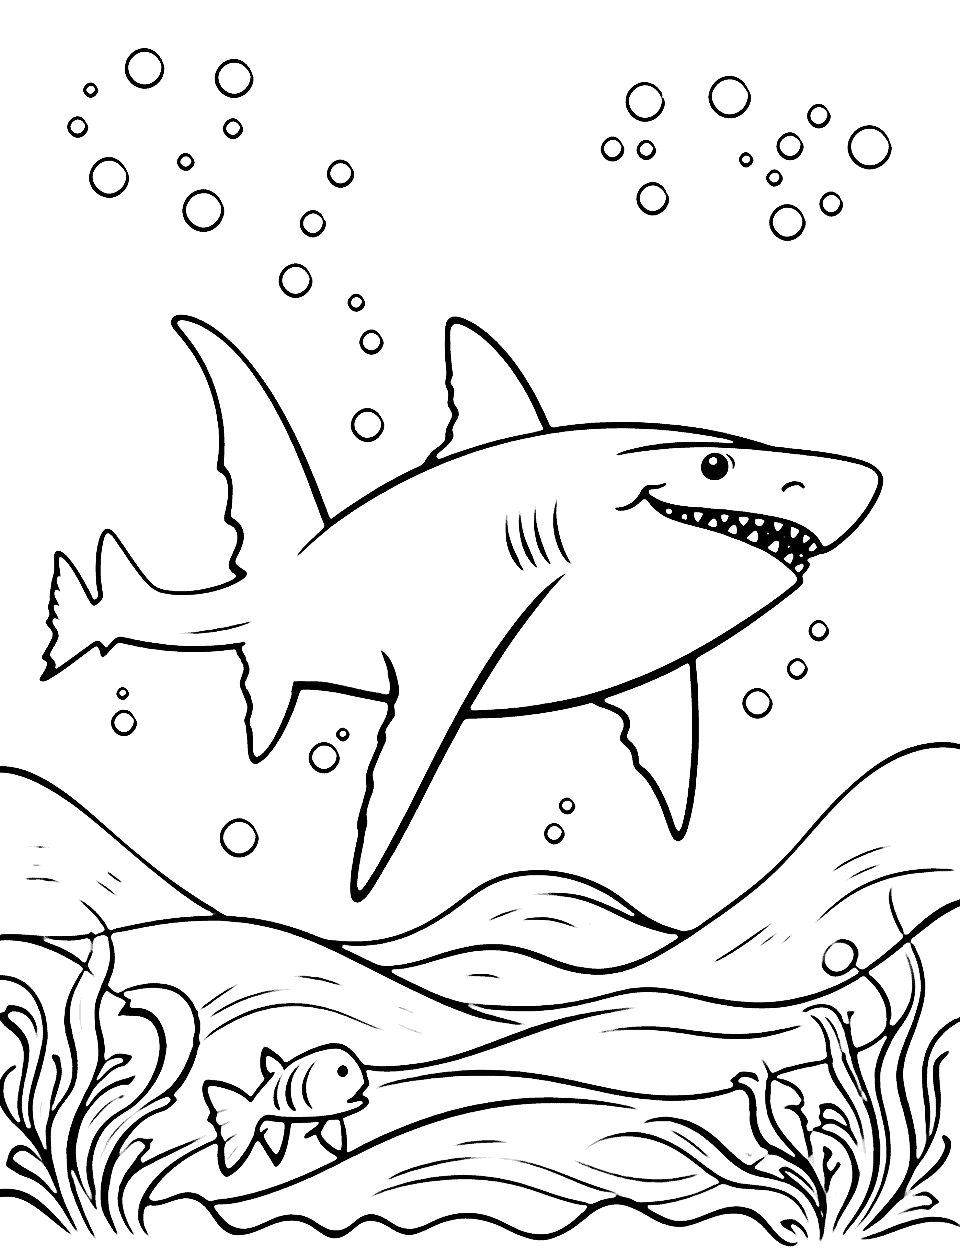 Shark Under the Moonlight Coloring Page - A scene of a shark swimming under the moonlight.